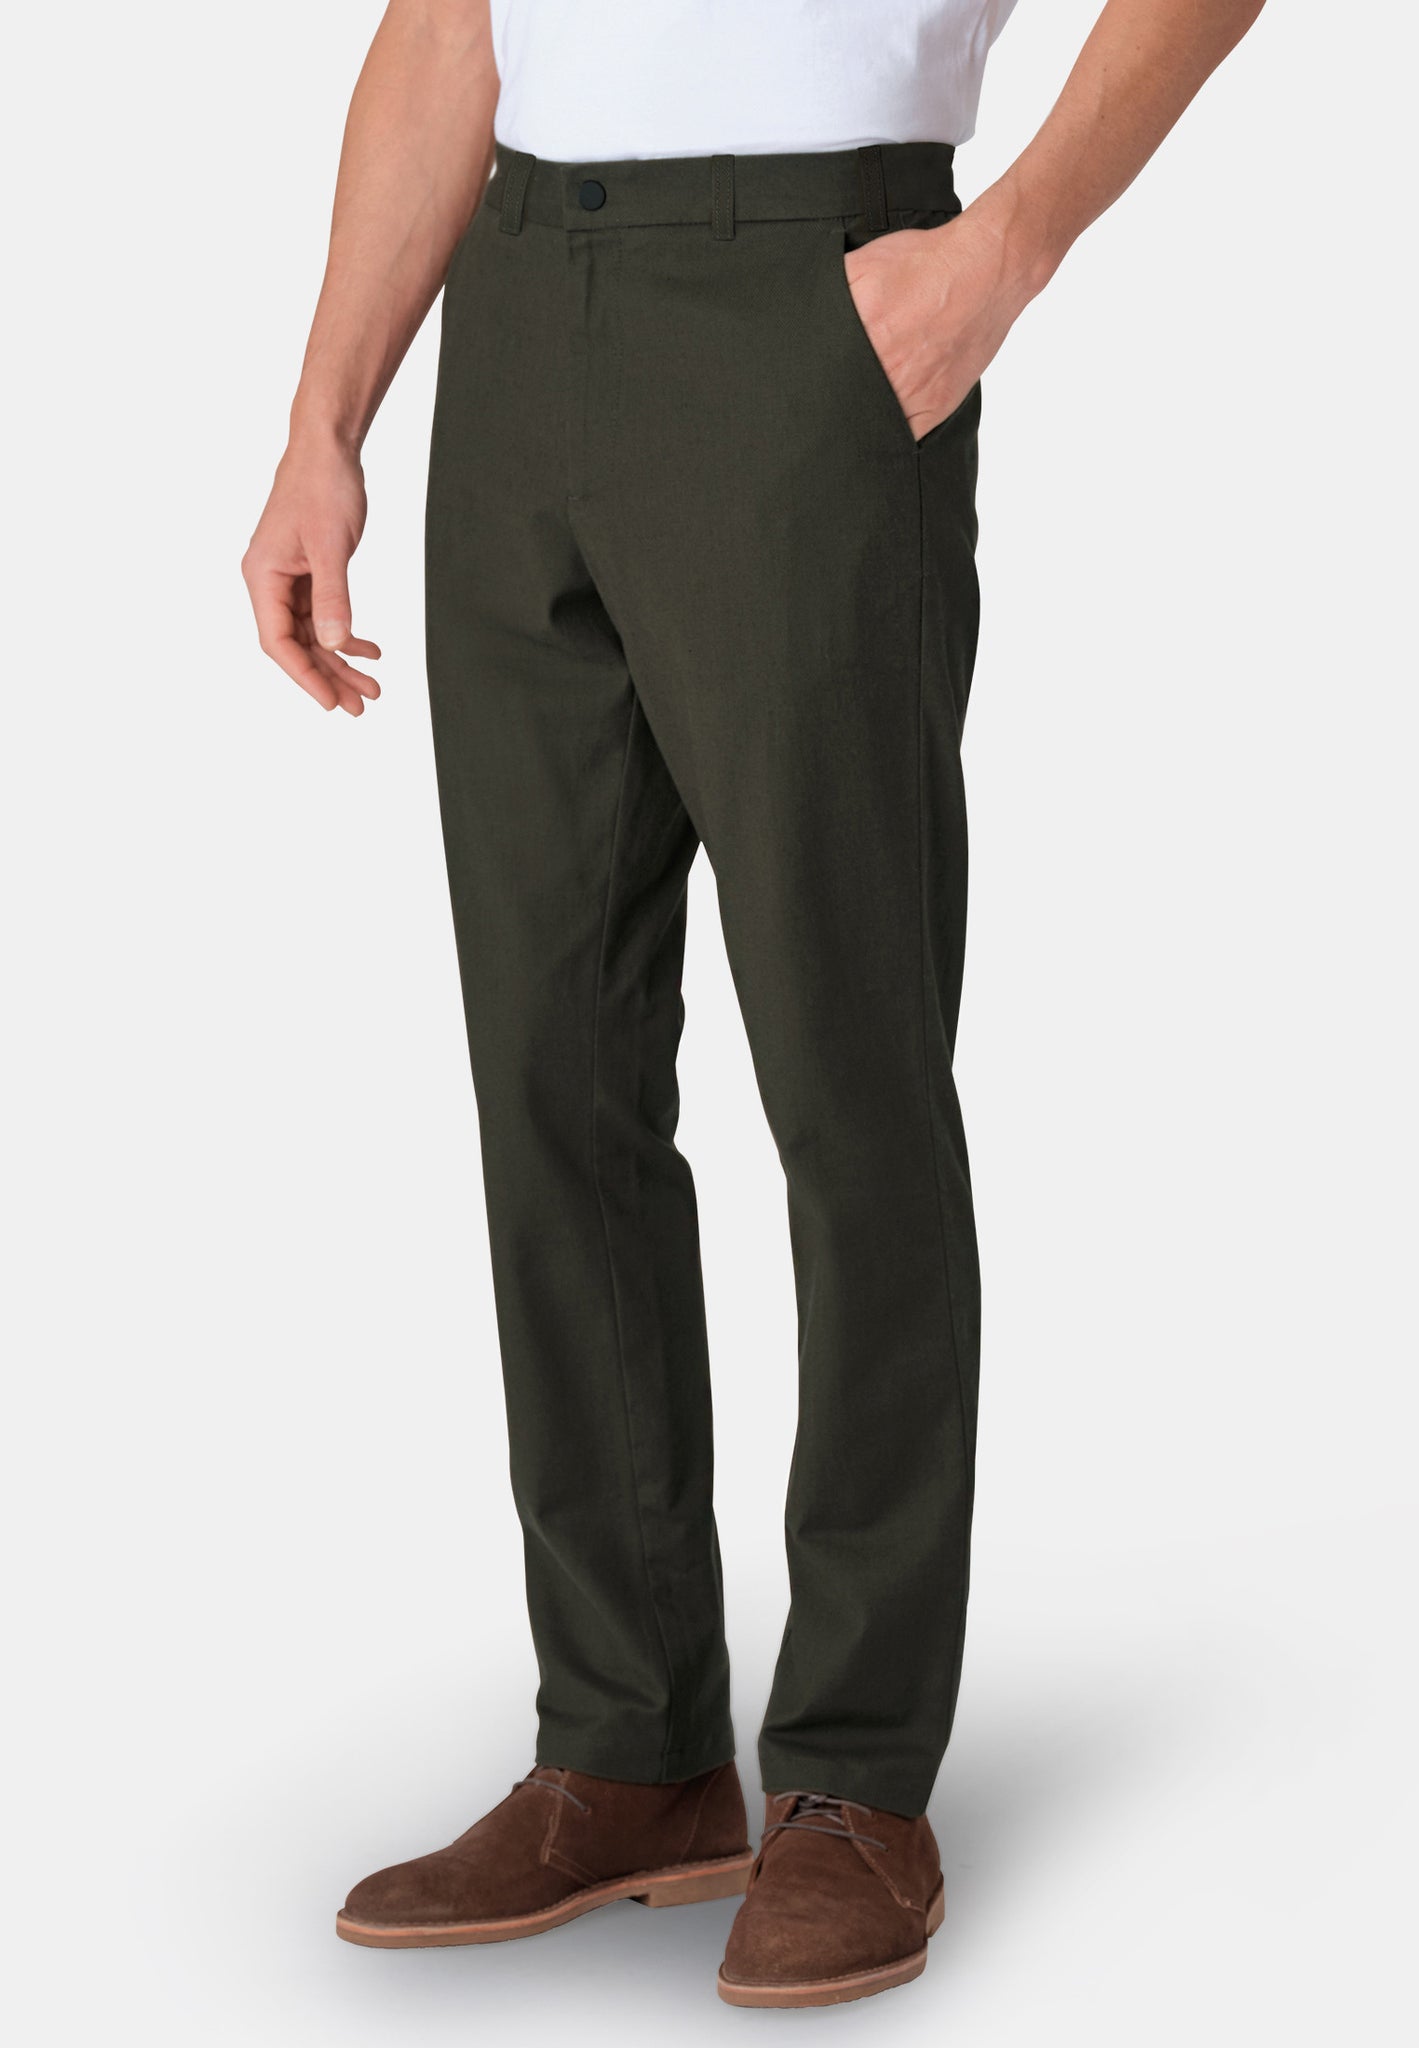 Wordsworth Tailored Cotton Trousers